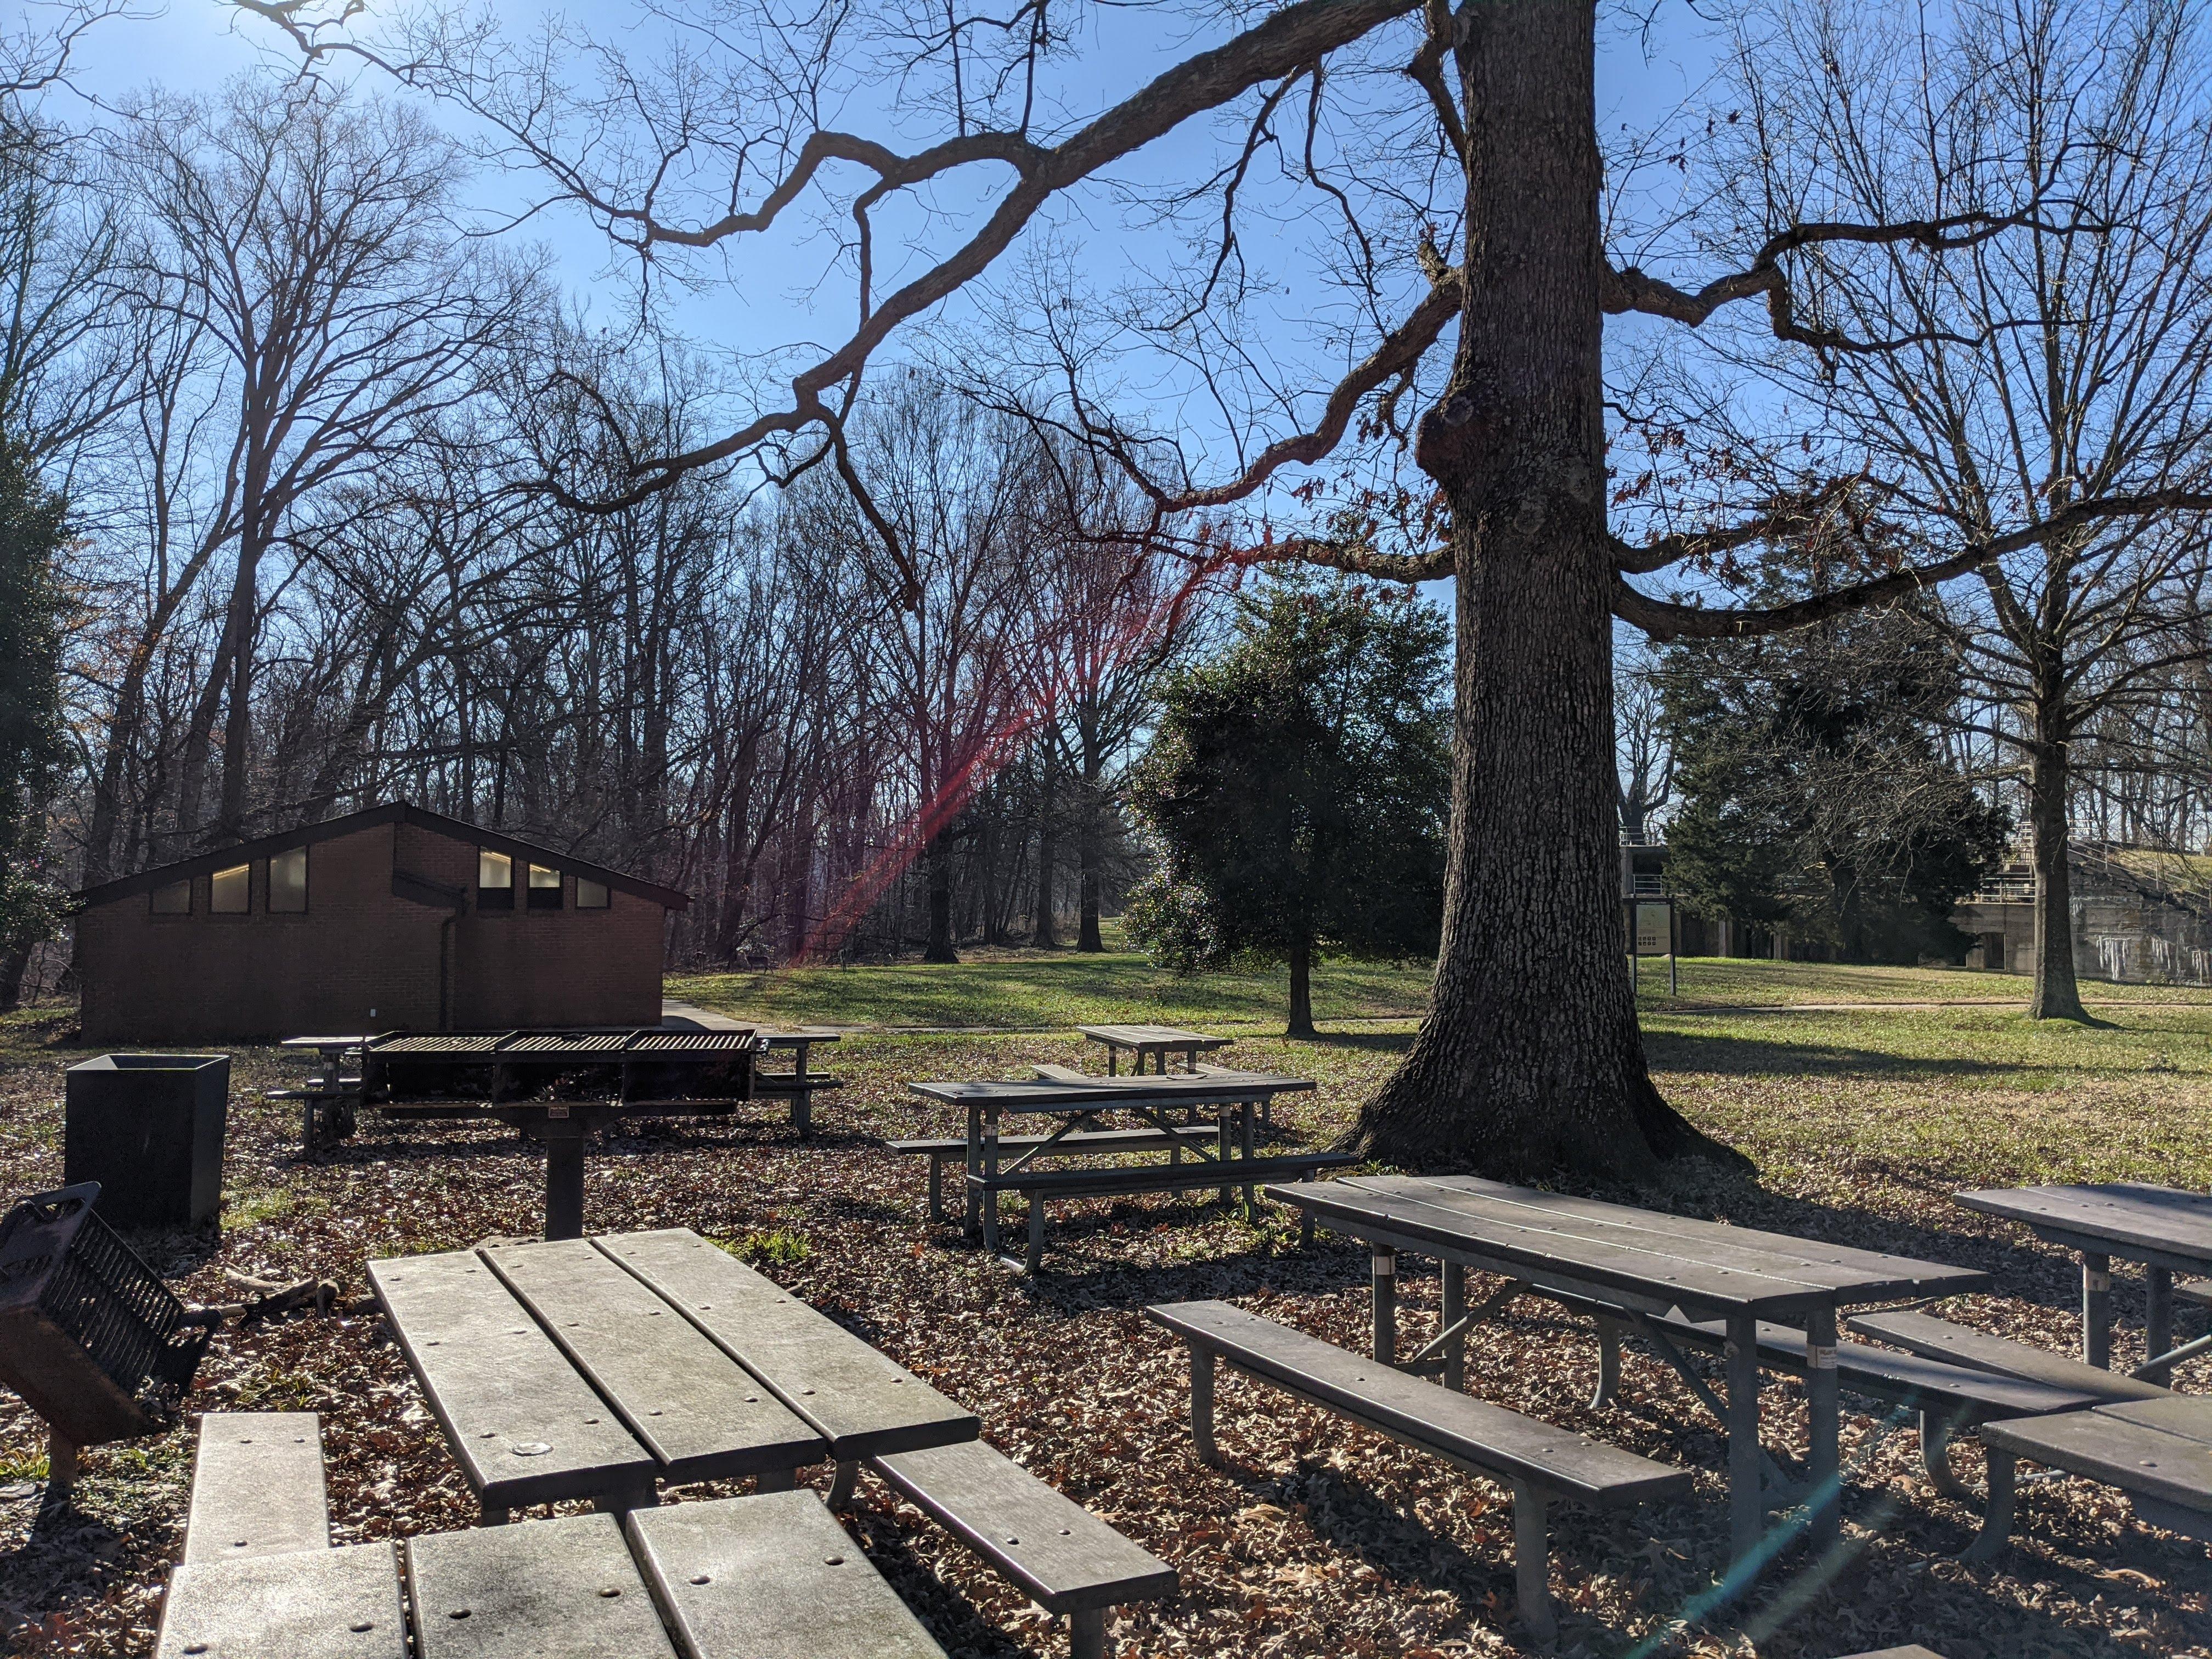 Picnic tables under a tree